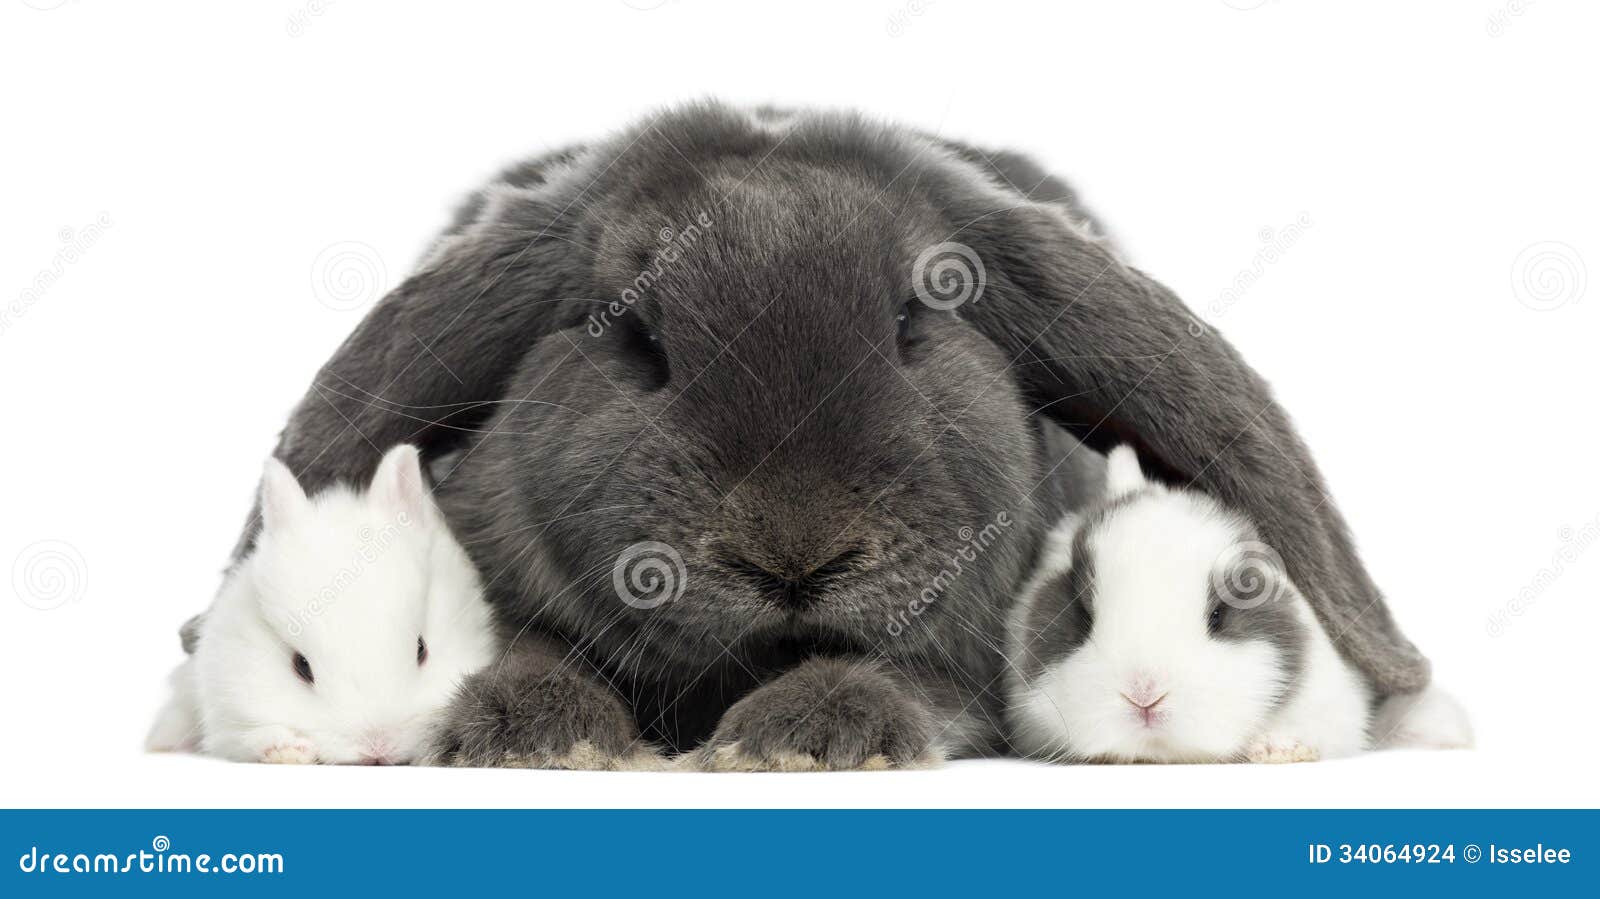 lop-eared rabbit and young rabbits, 